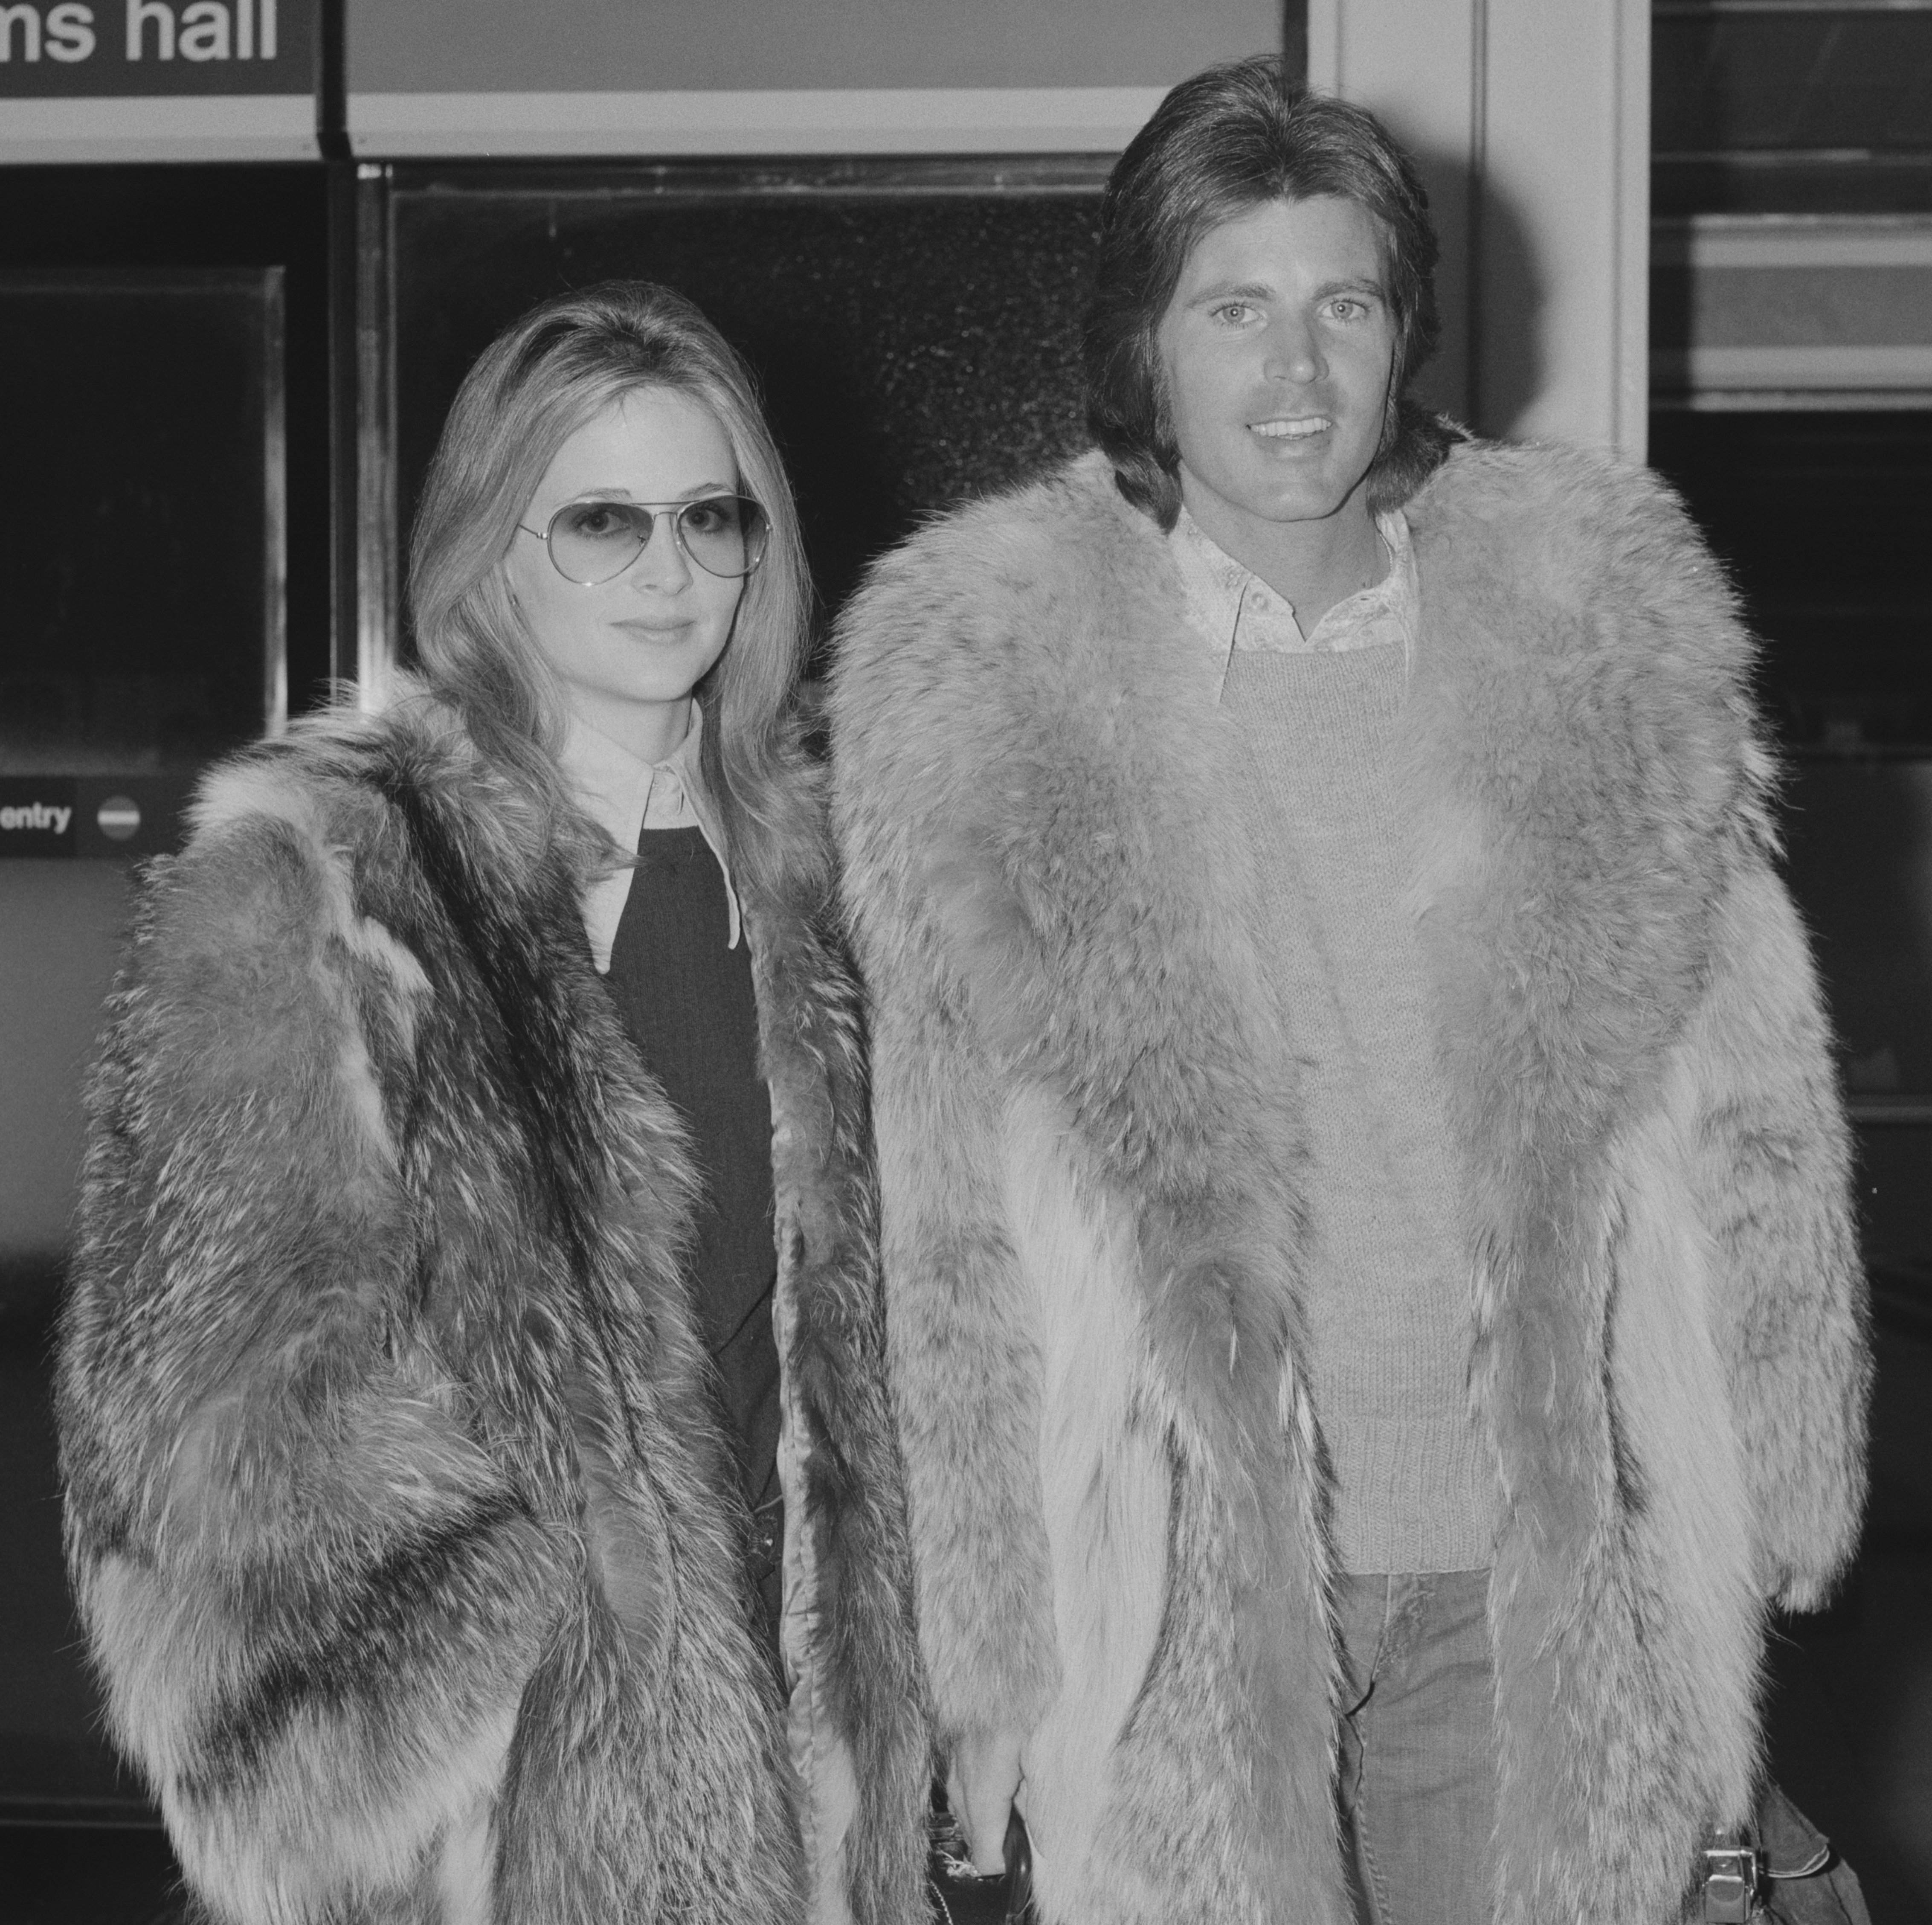 Ricky Nelson and his wife Kristin Harmon arrive at London Airport on February 16, 1972. | Photo: Getty Images